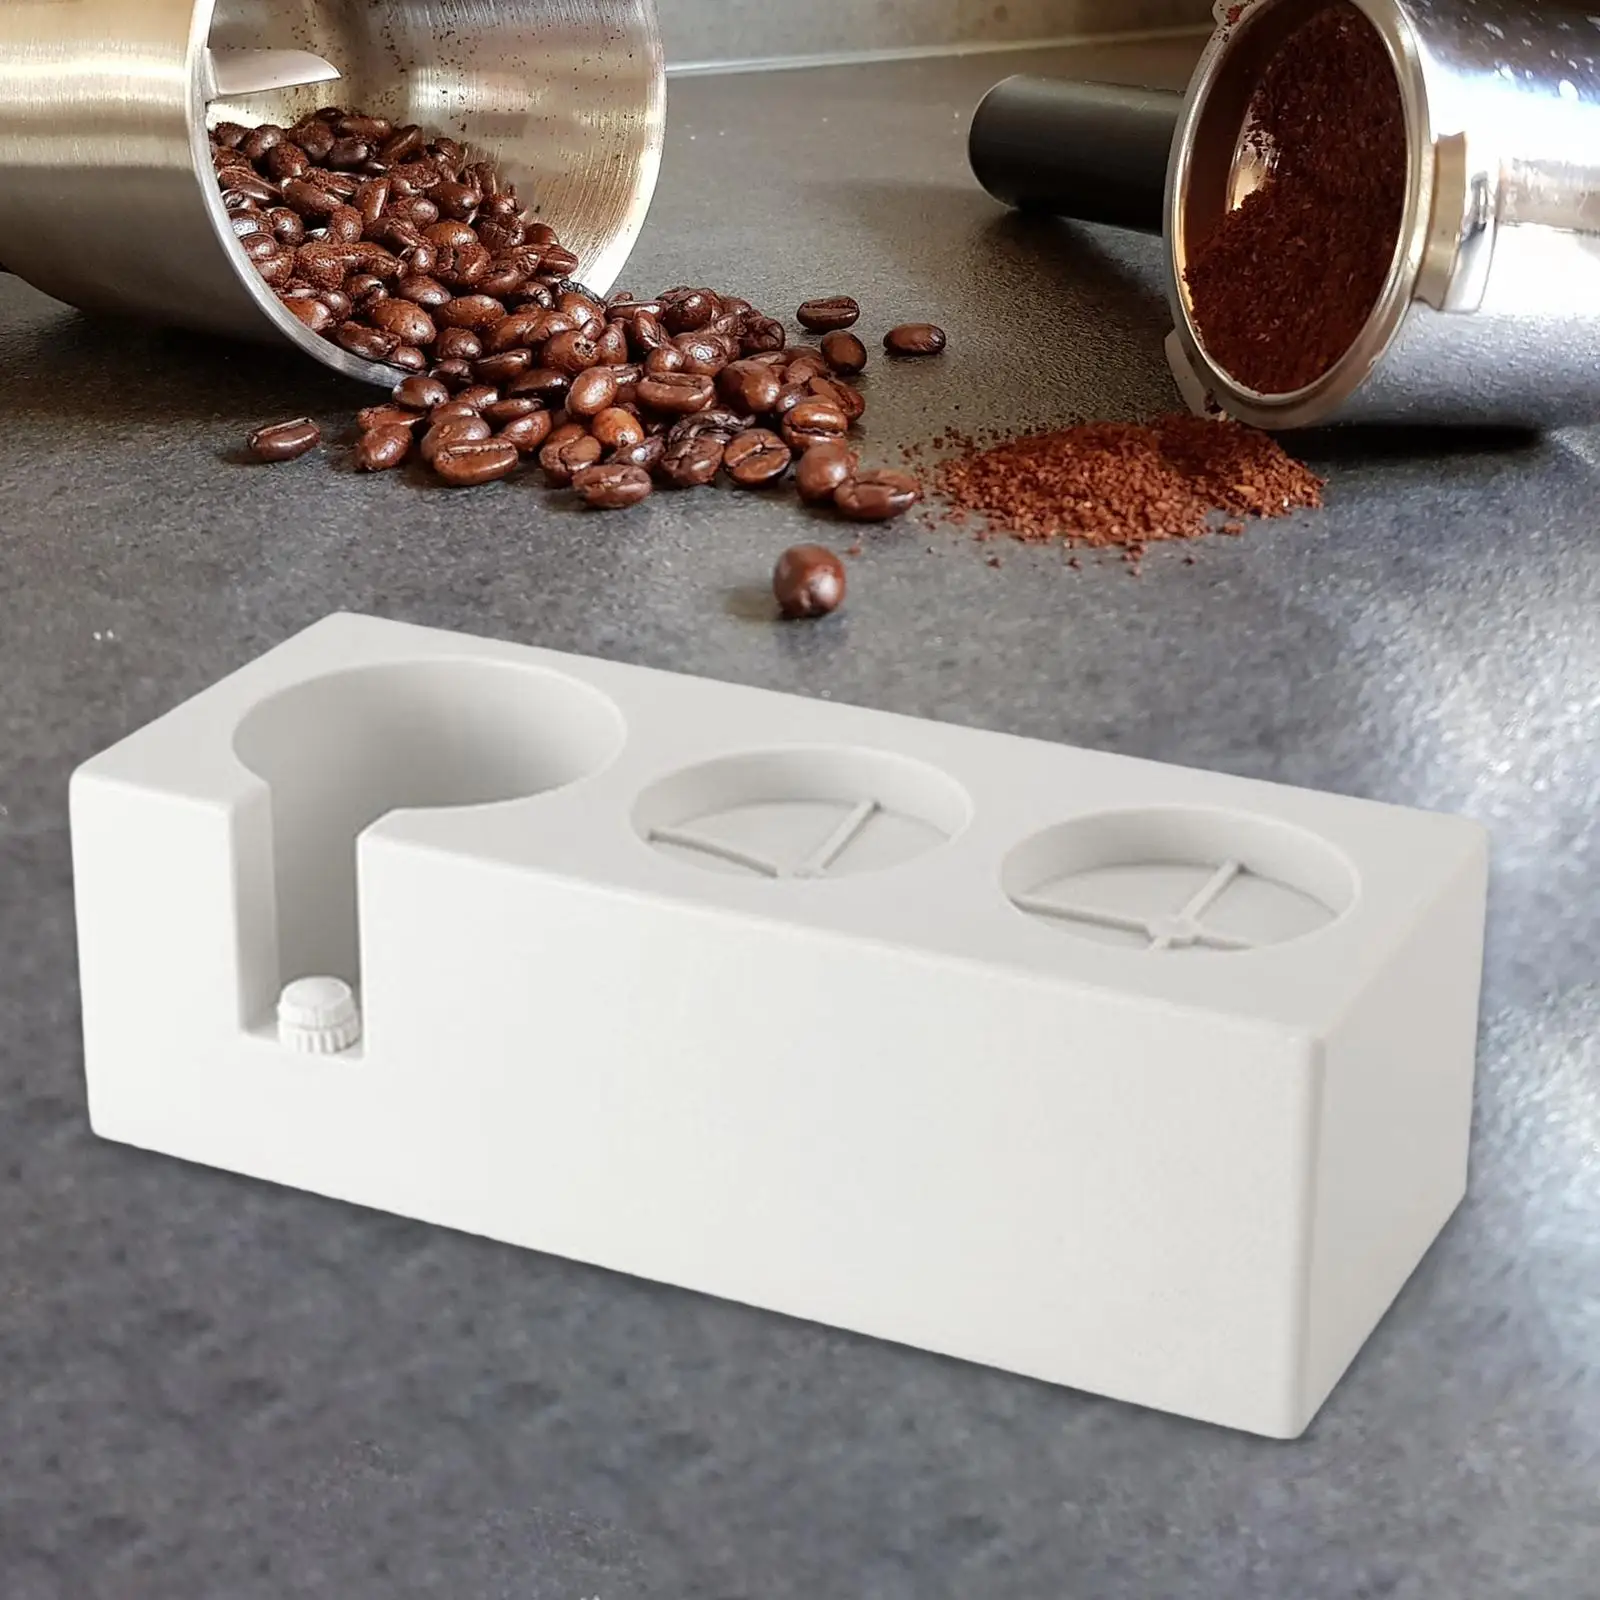 Coffee Tamper Holder for Portafilters, Tamper and Distributor Adjustable Coffee Maker Accessory Tamper Station for Coffee Making